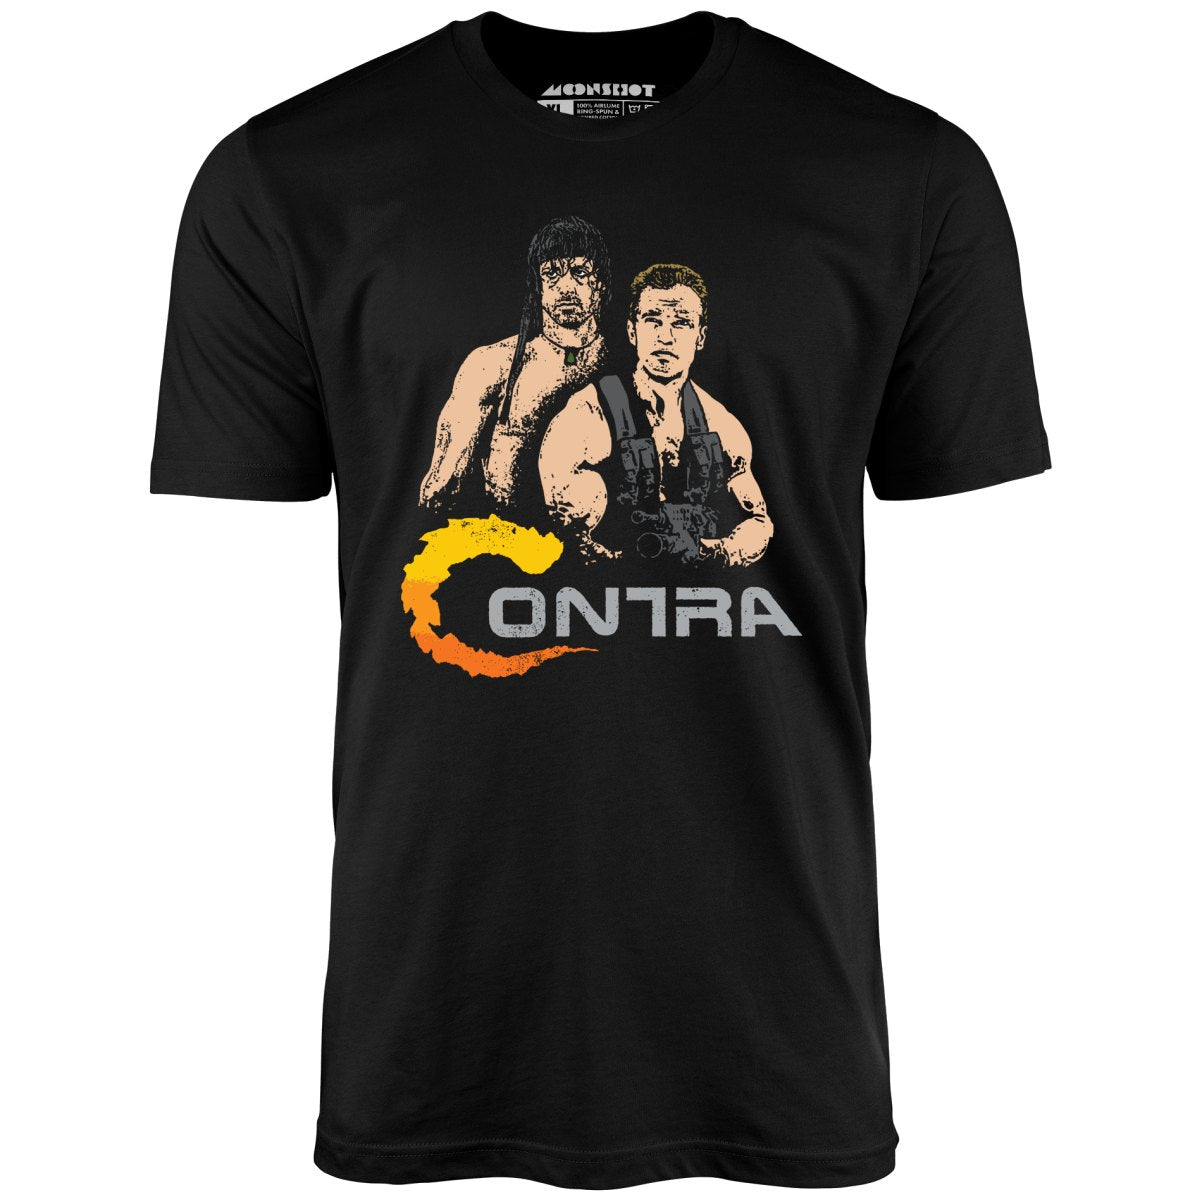 Contra Action Heroes Mashup Parody - Unisex T-Shirt